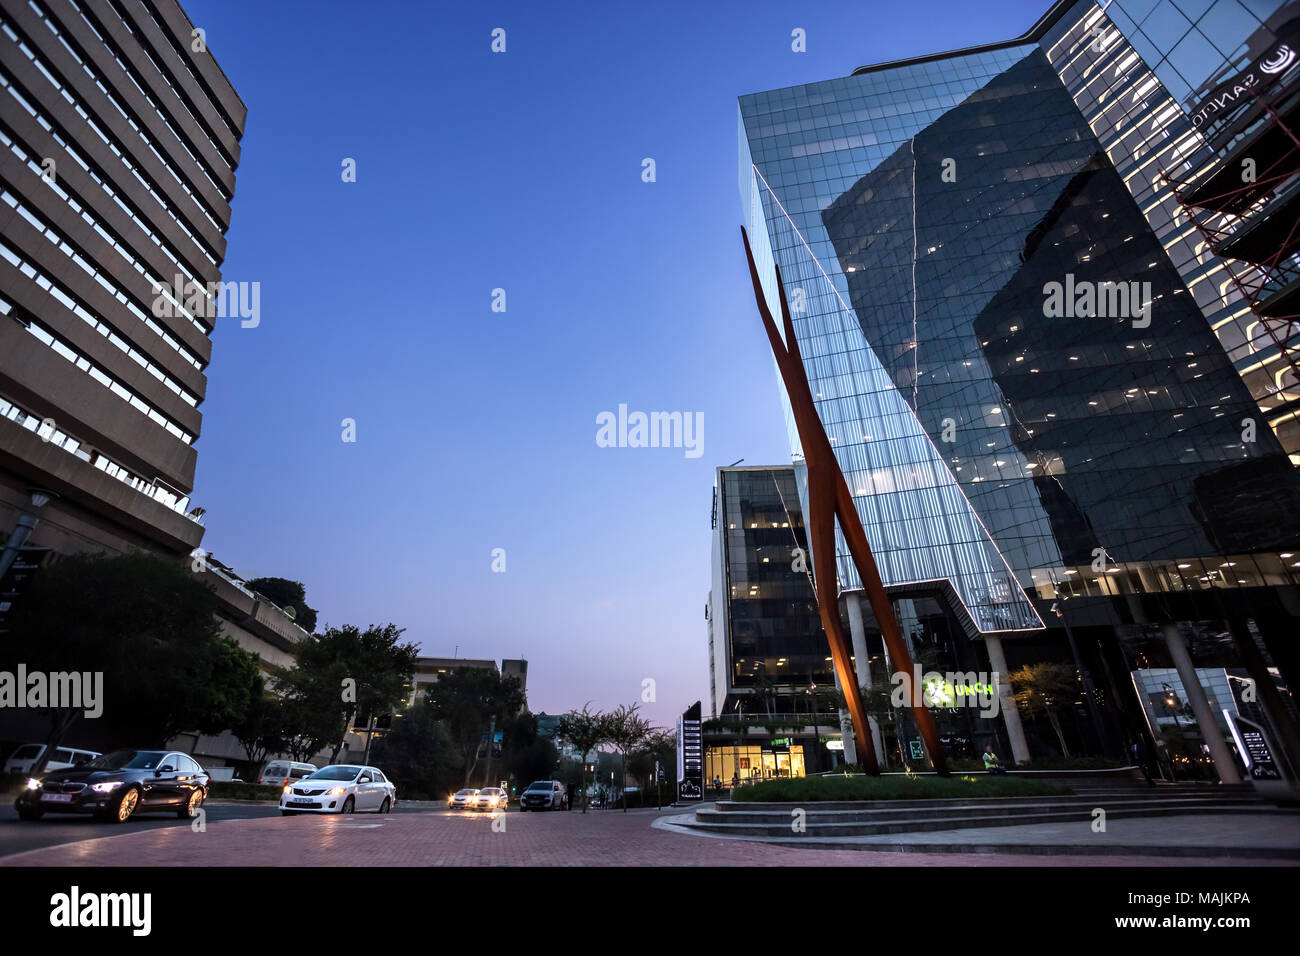 Johannesburg, South Africa, March 29-2018: Street scene with modern buildings in evening light. Stock Photo